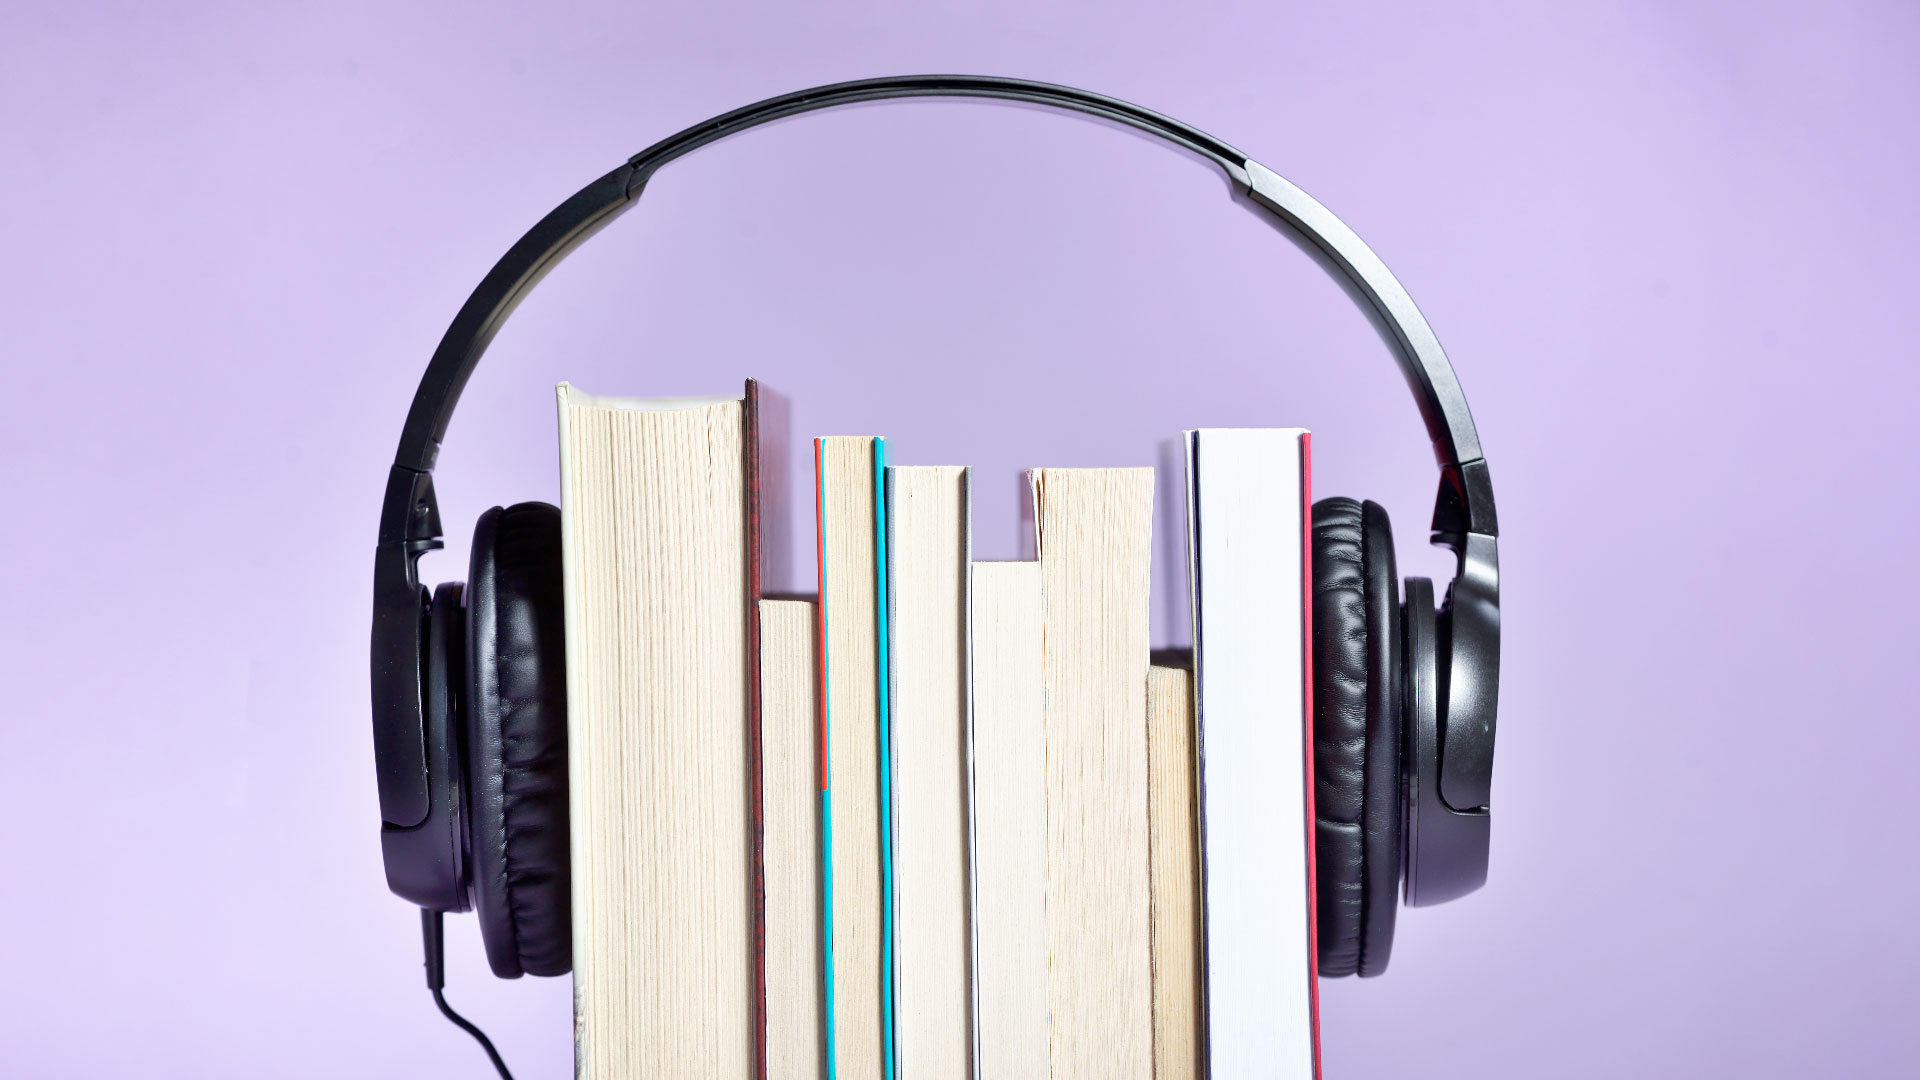 Close-Up Of Books With Headphones Against Purple Background